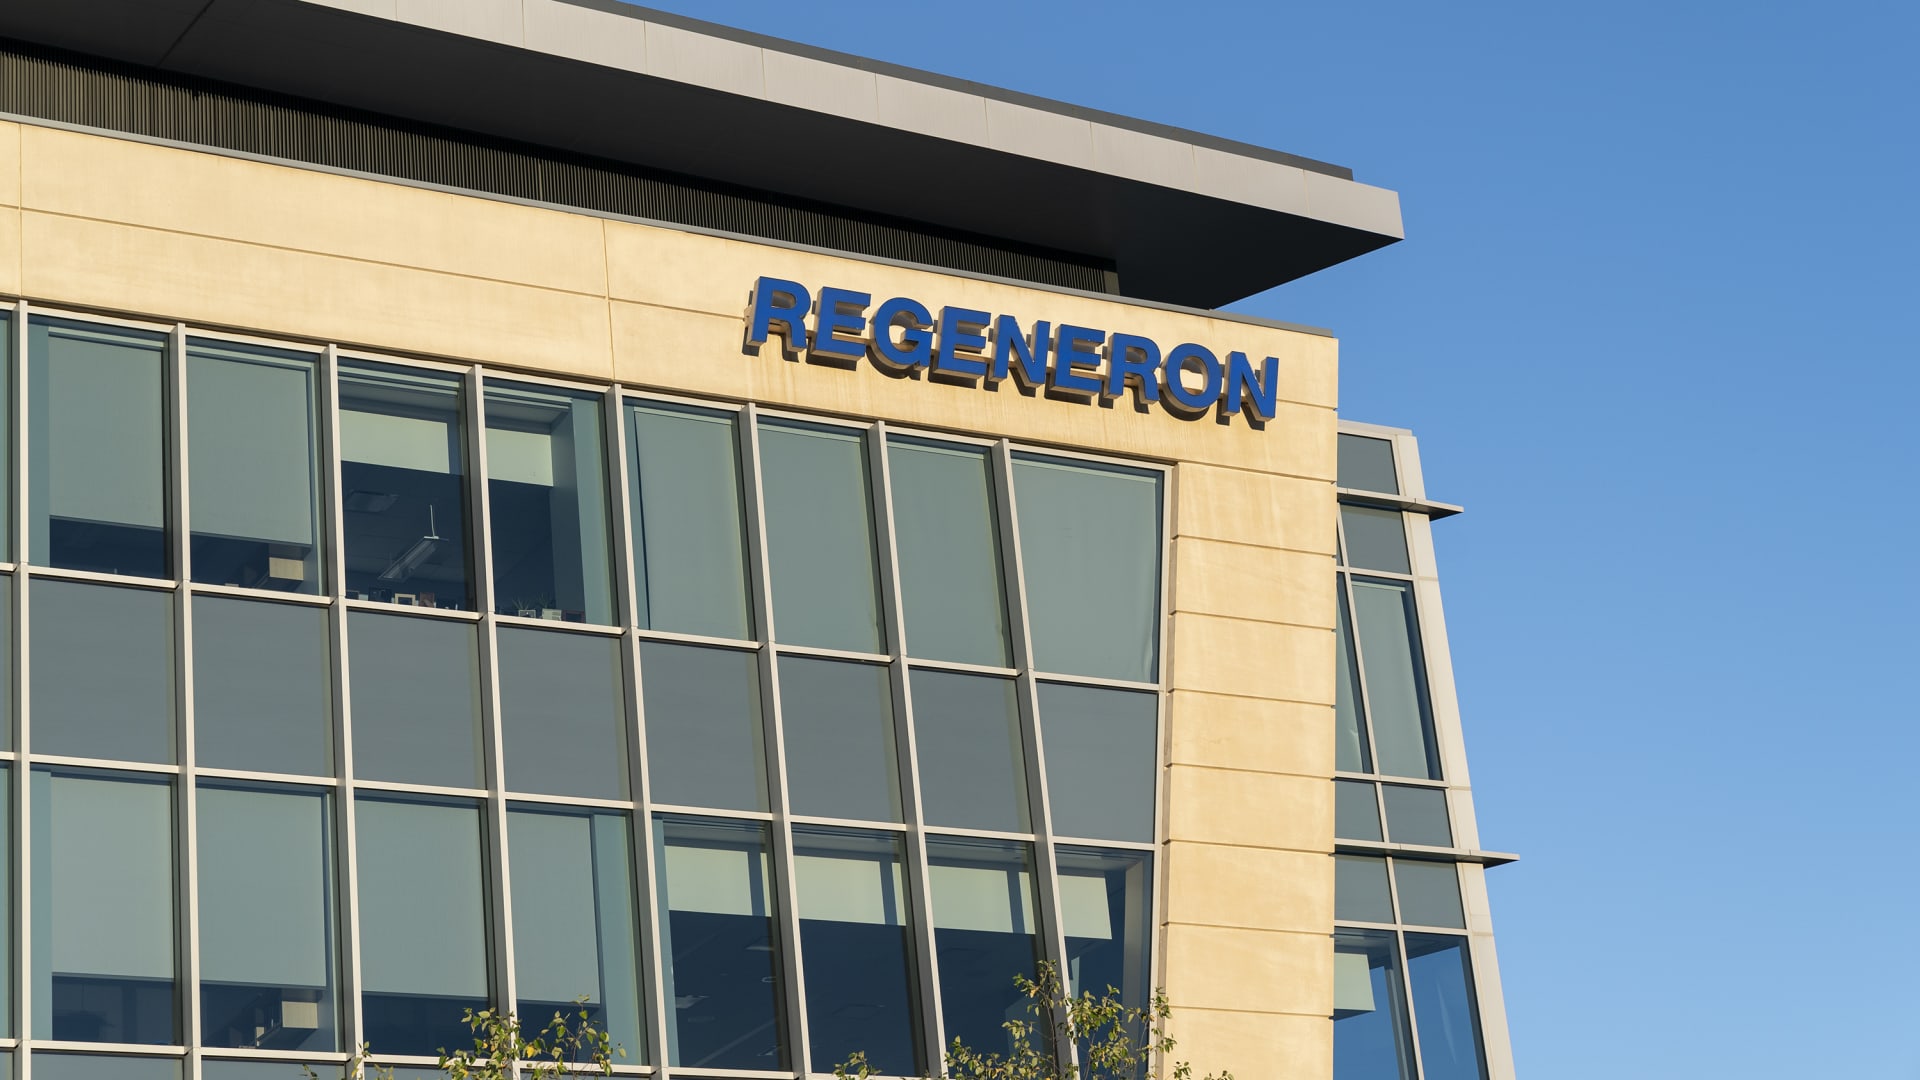 Regeneron shares fall after FDA rejects eye disease treatment